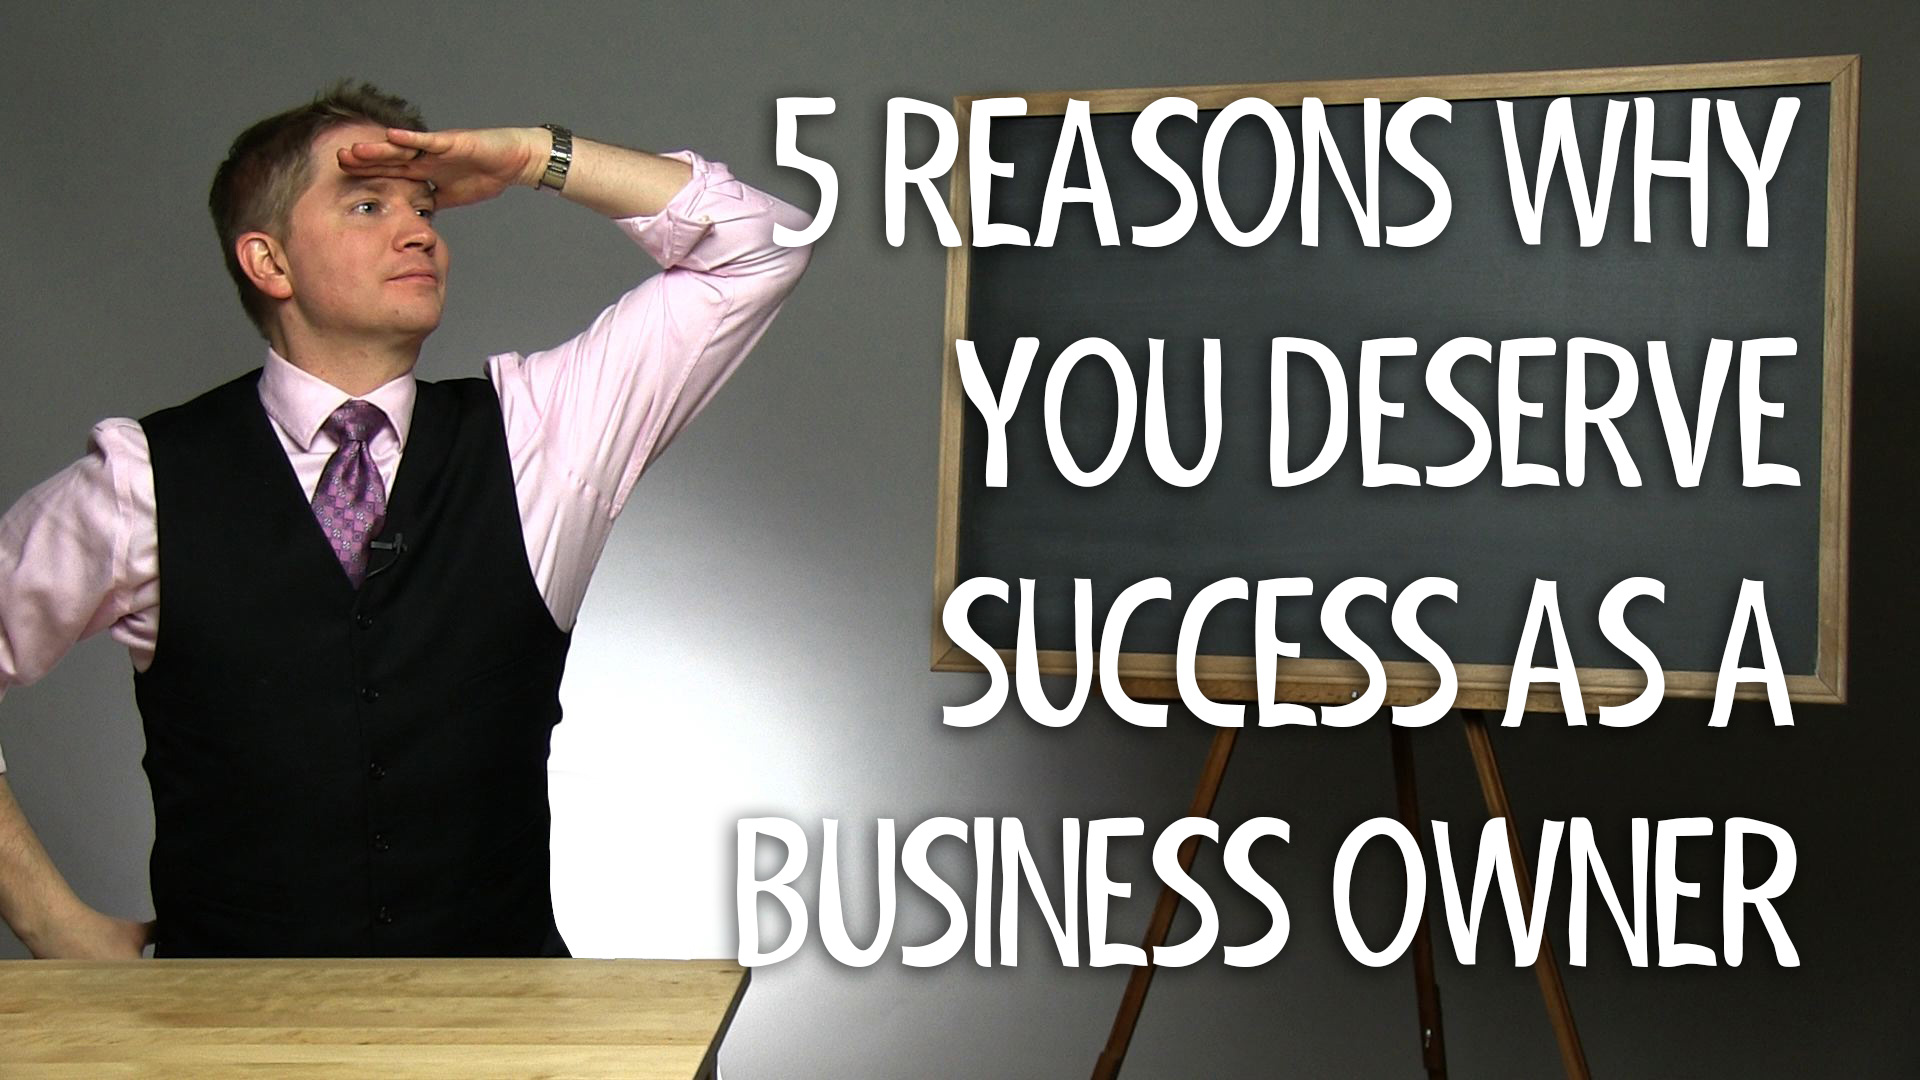 5 Reasons You Deserve Success As a Business Owner